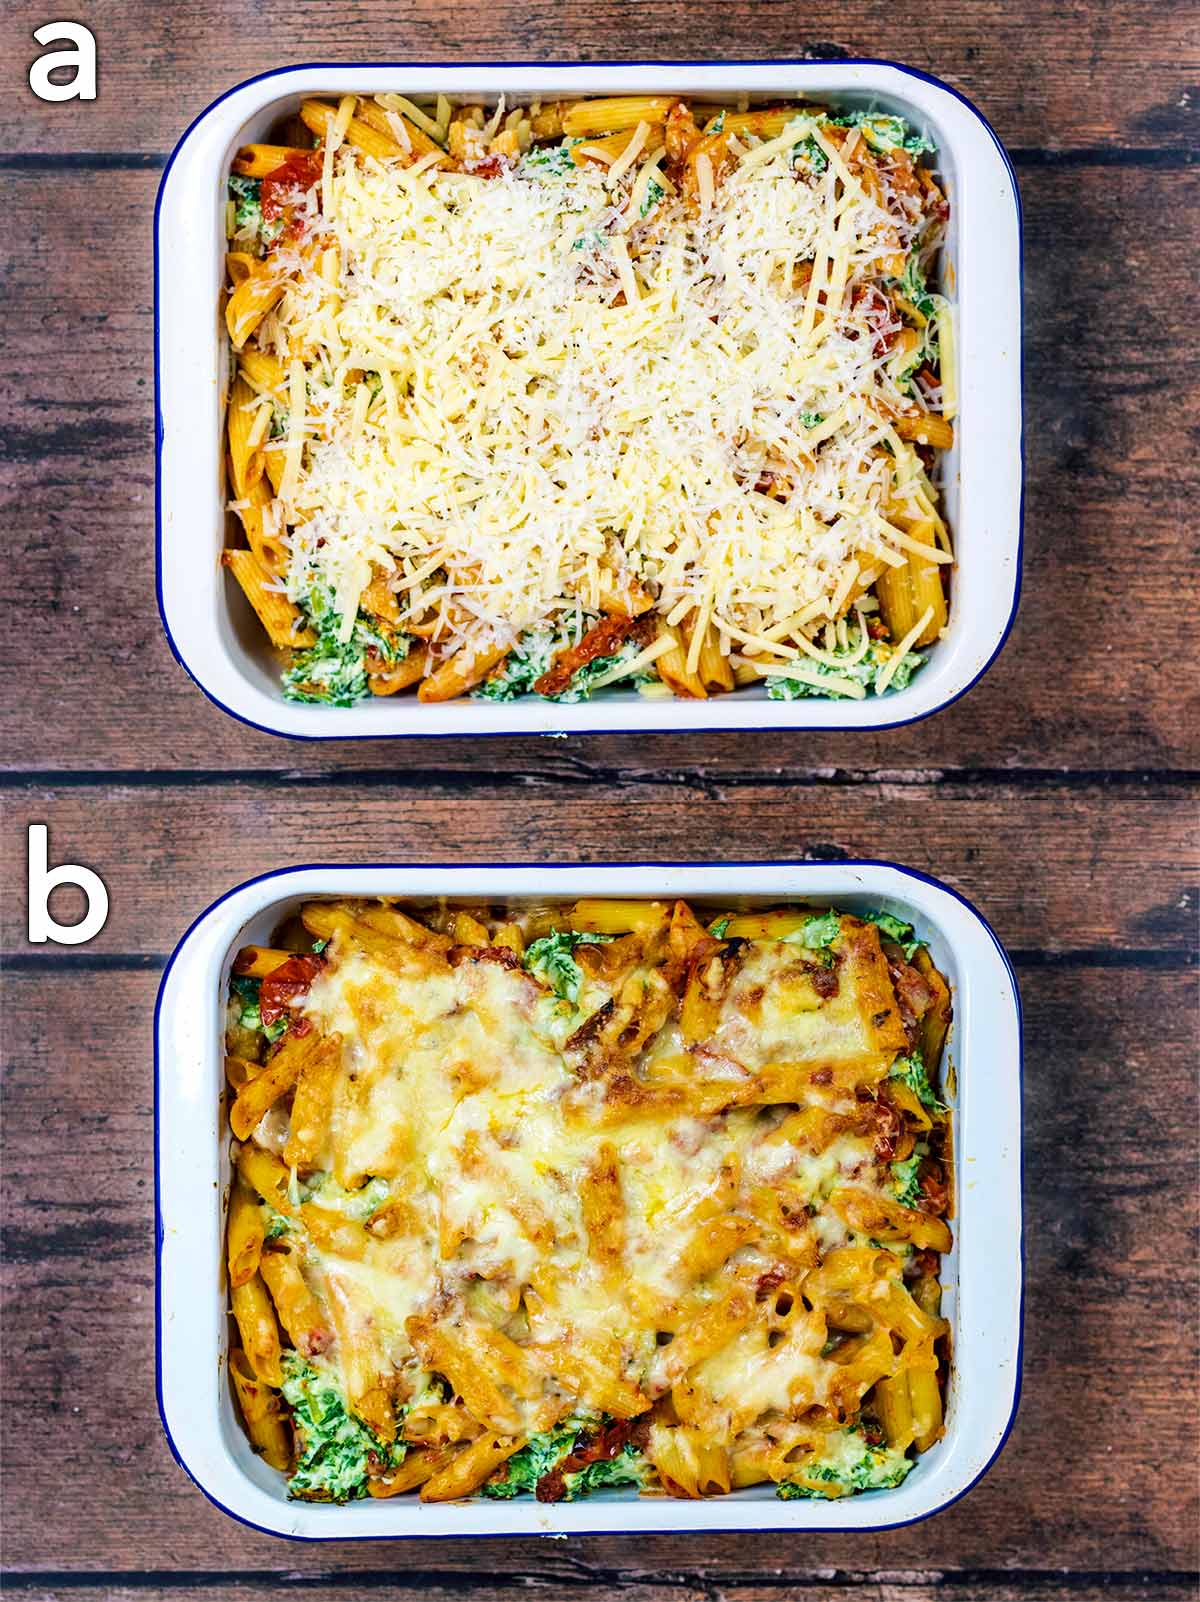 Two shot collage of the pasta bake, first topped with grated cheddar, then with the cheddar melted.